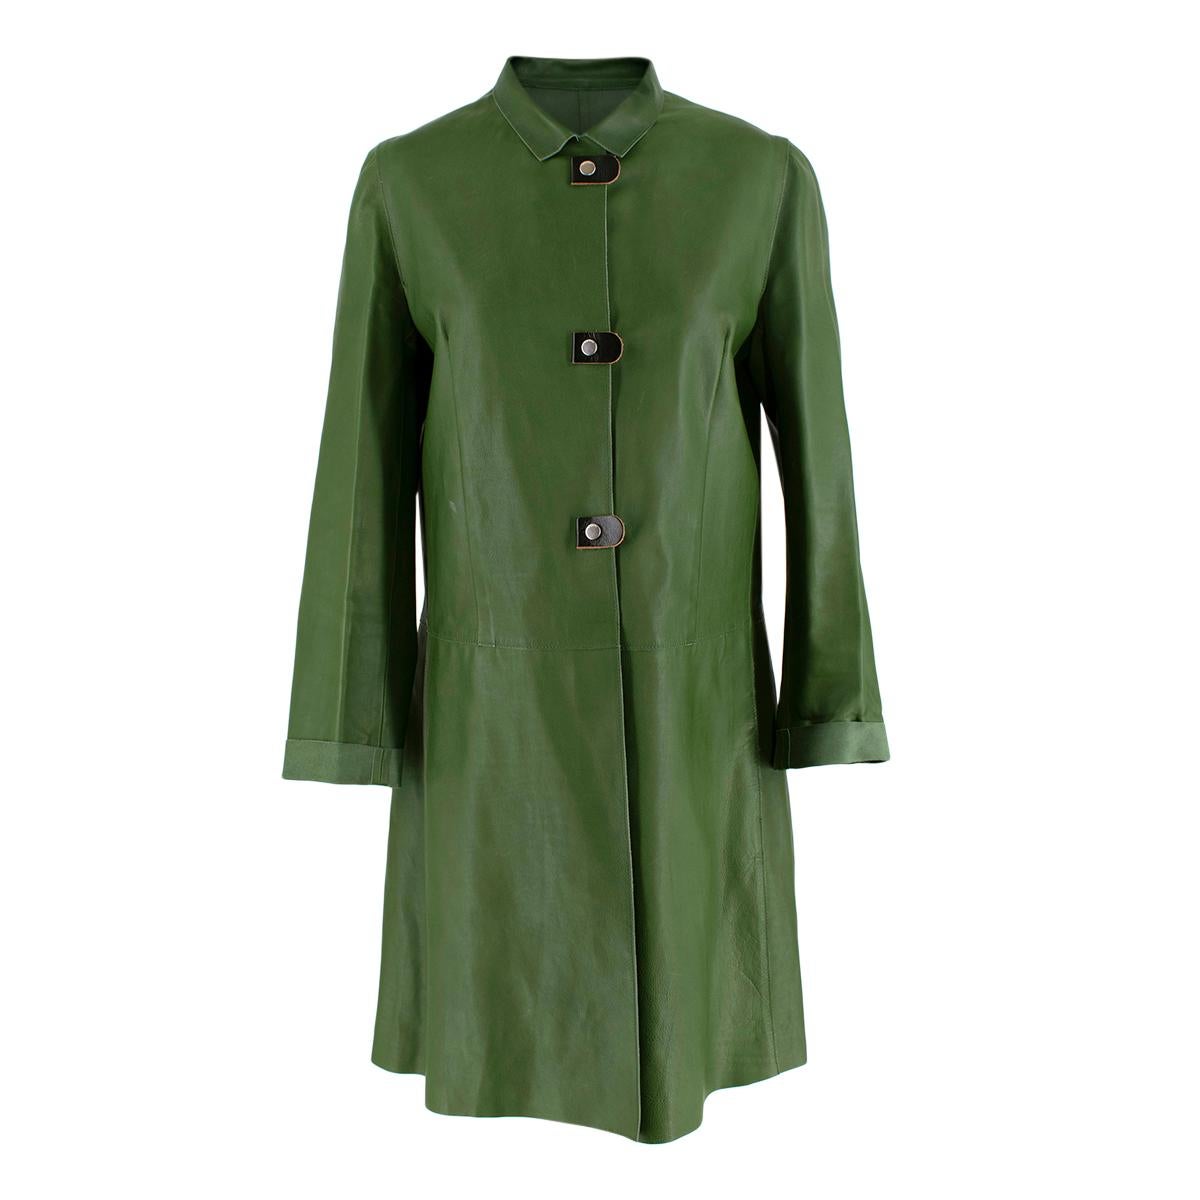 Marni Green Calf Leather Mid-Length Coat

- Grain calfskin leather in a rich green tone 
- Retro inspired styling with a slim cut, small point collar, and gently flared silhouette
- Front silver-tone popper fastening with black leather tabs
- Rolled